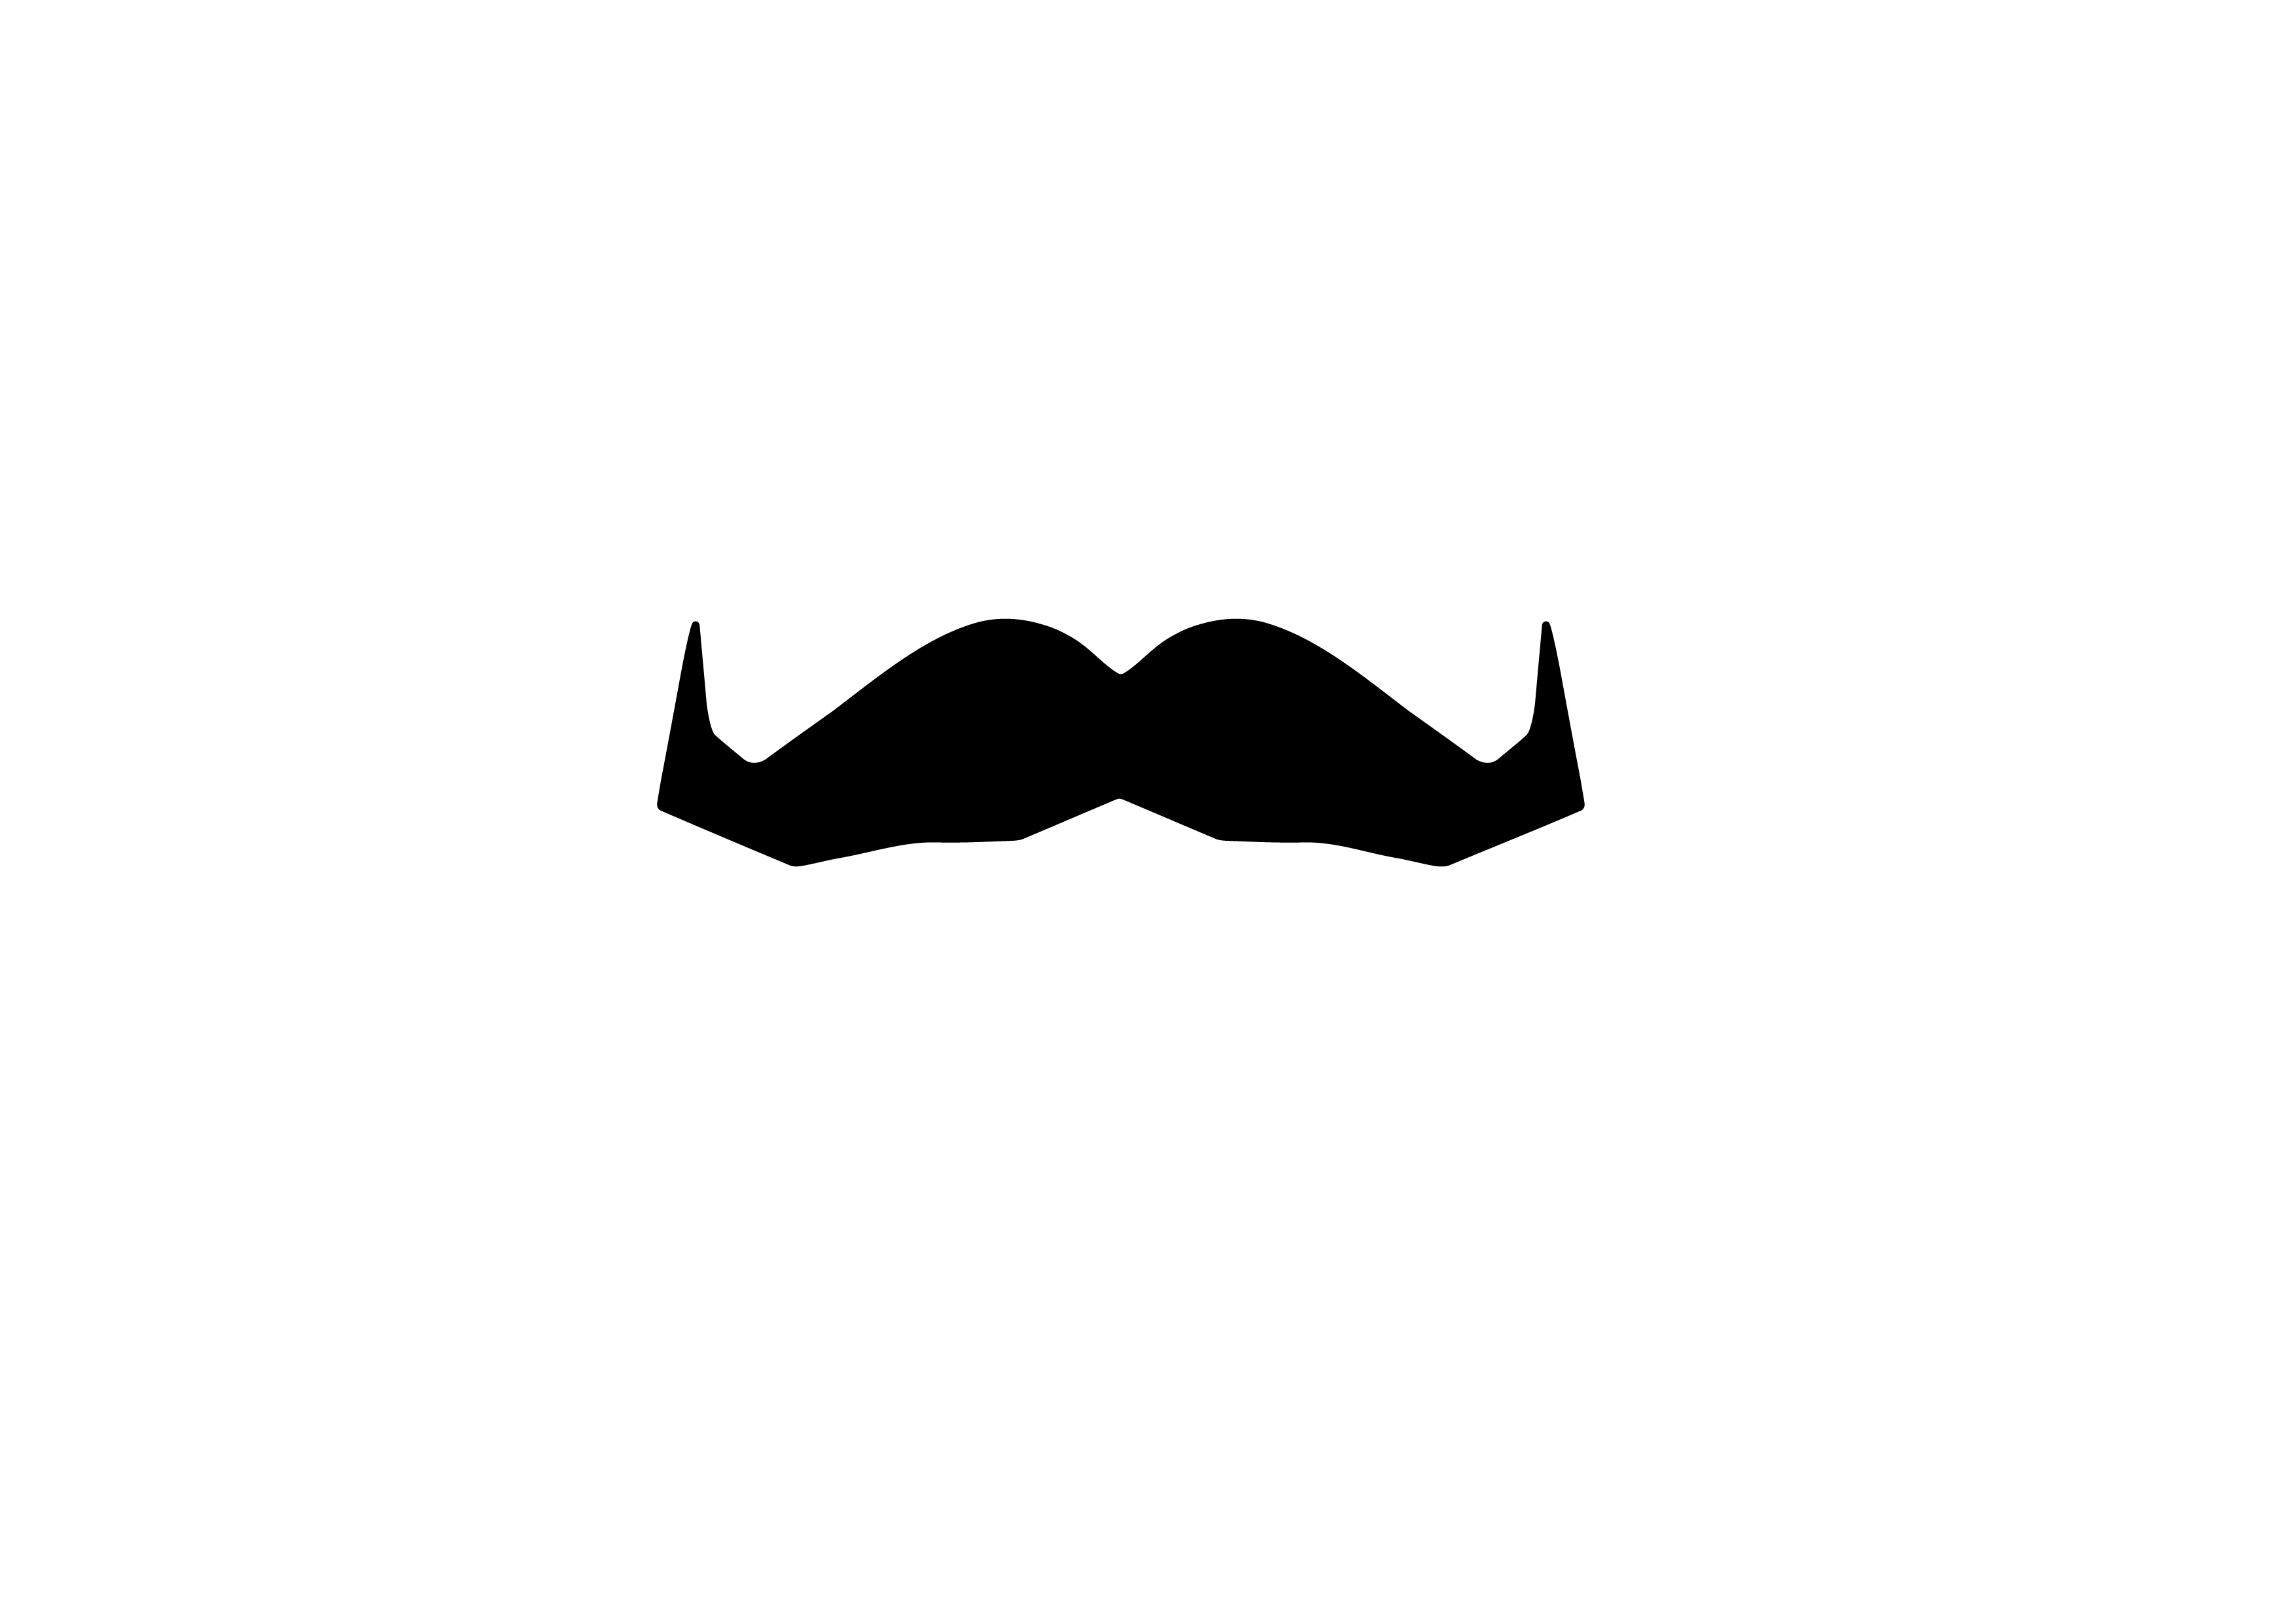 Movember': Time to talk about men's physical and mental health